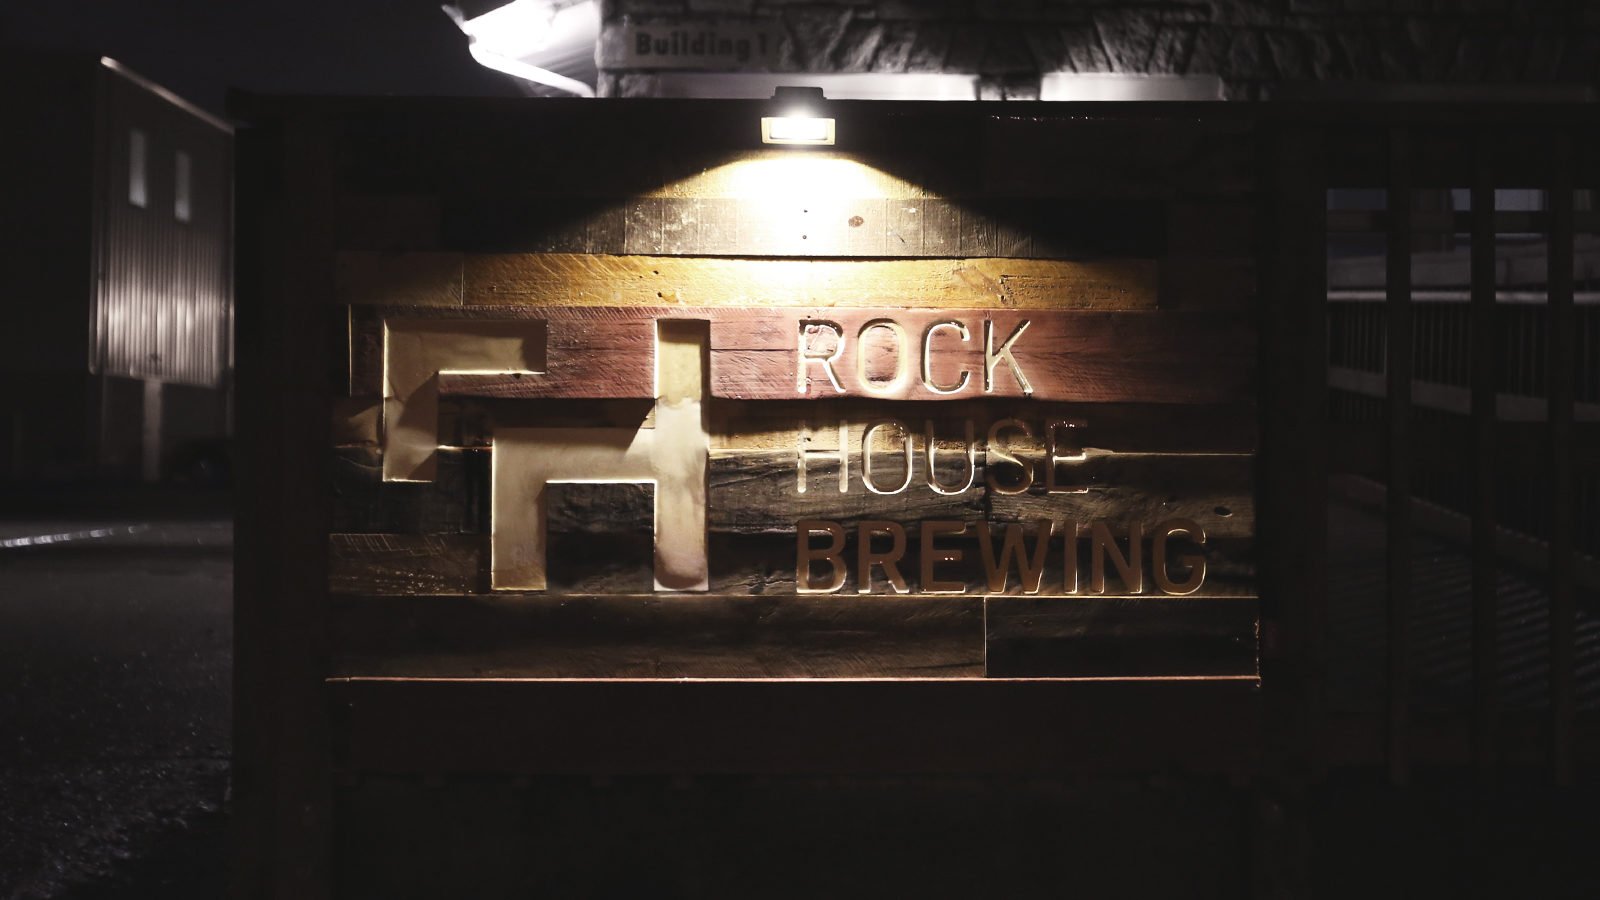 A Brand Identity for Rock House Brewing by Bullhorn Creative